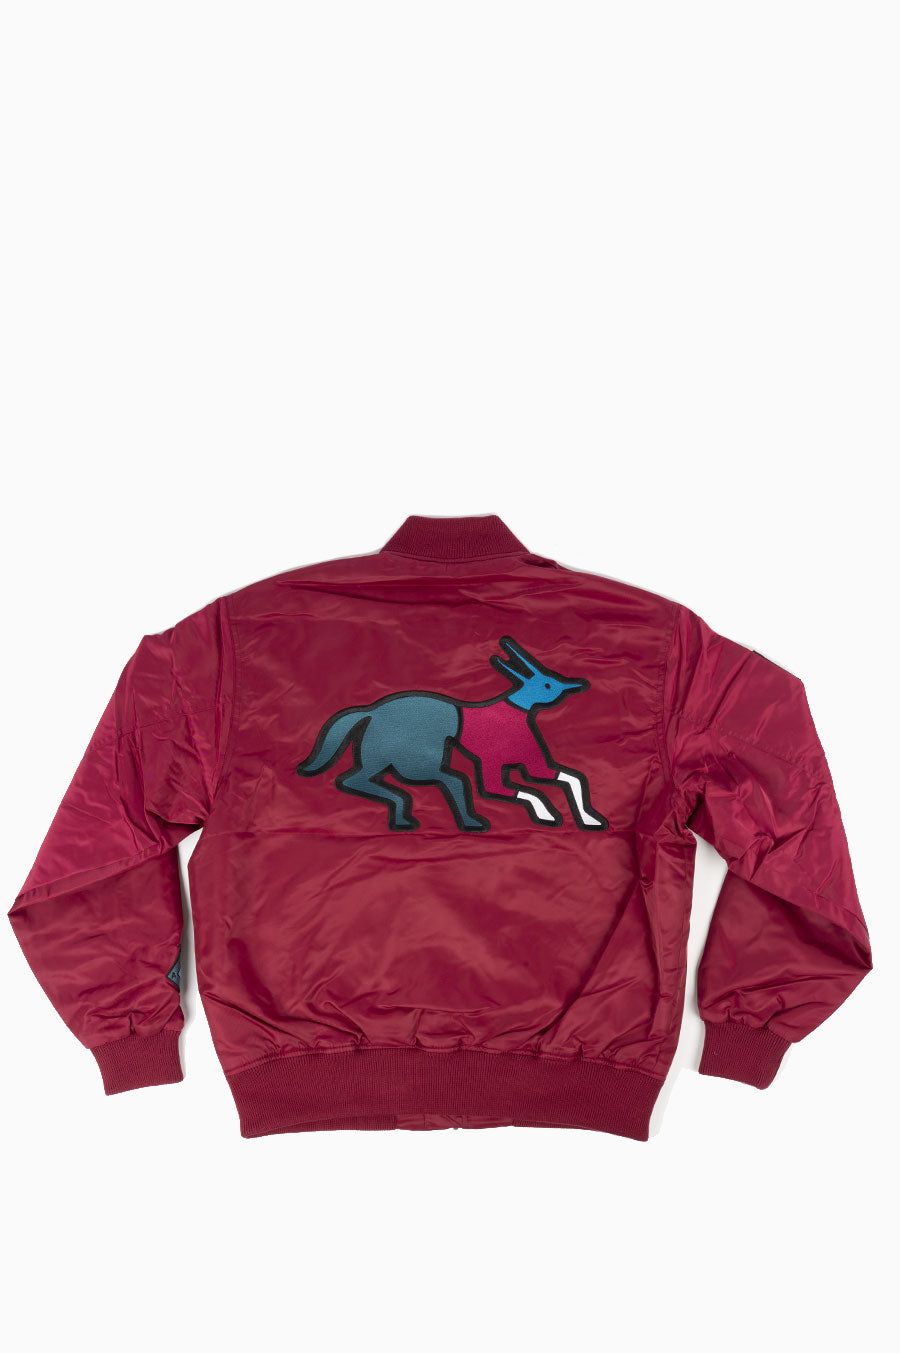 PARRA STACKED PETS VARSITY JACKET RED